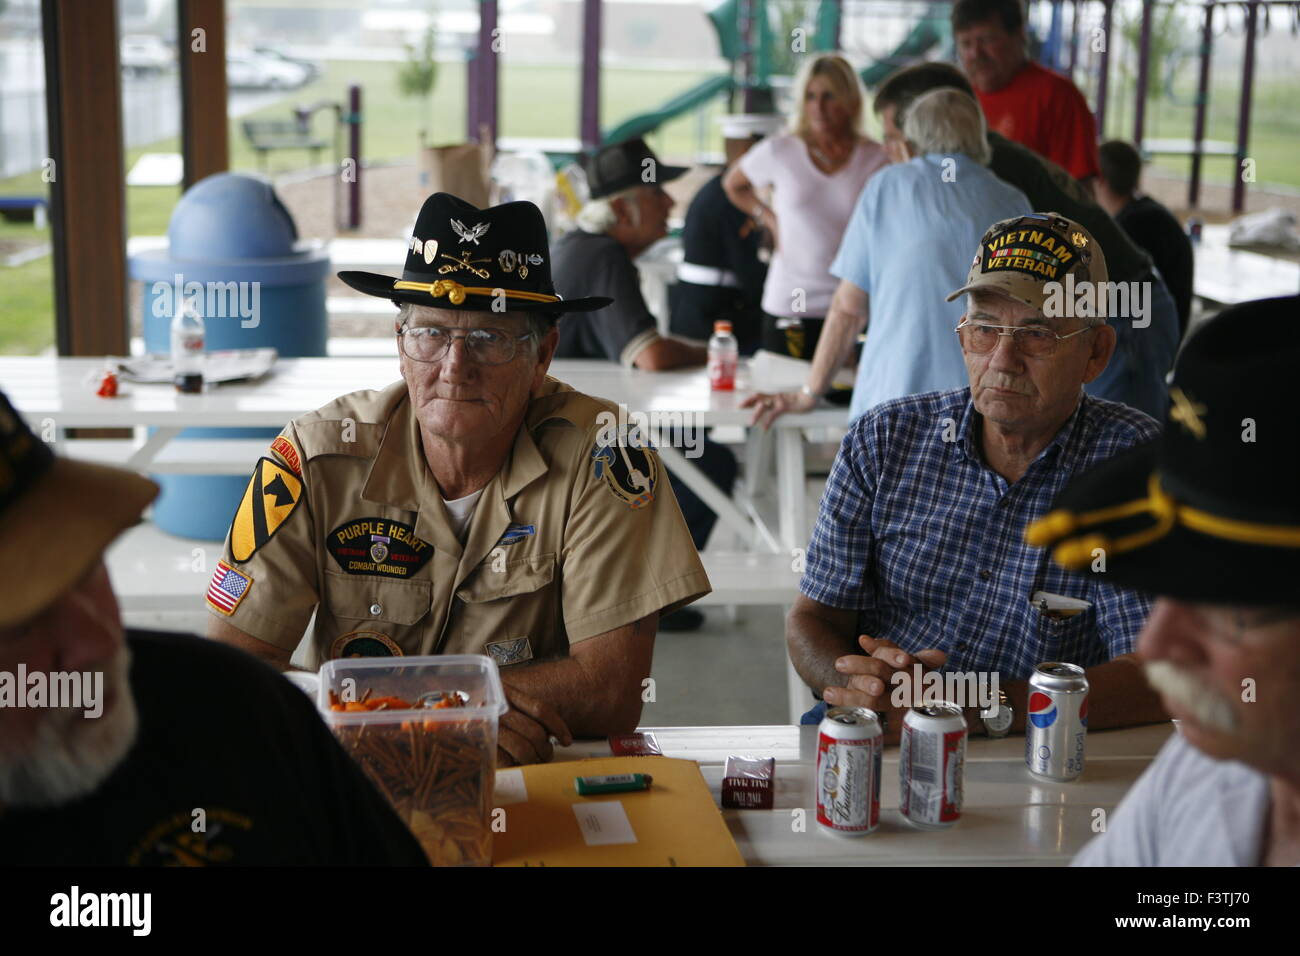 B Co. 1/7th Cavalry Reunion in Effingham, Illinois. July 31-Aug2, 2009.   Bill Smith, left, who served in 1965 and 1966. James Ertle who served at LZ Xray in 1965 and later Bon Song in 66. Stock Photo